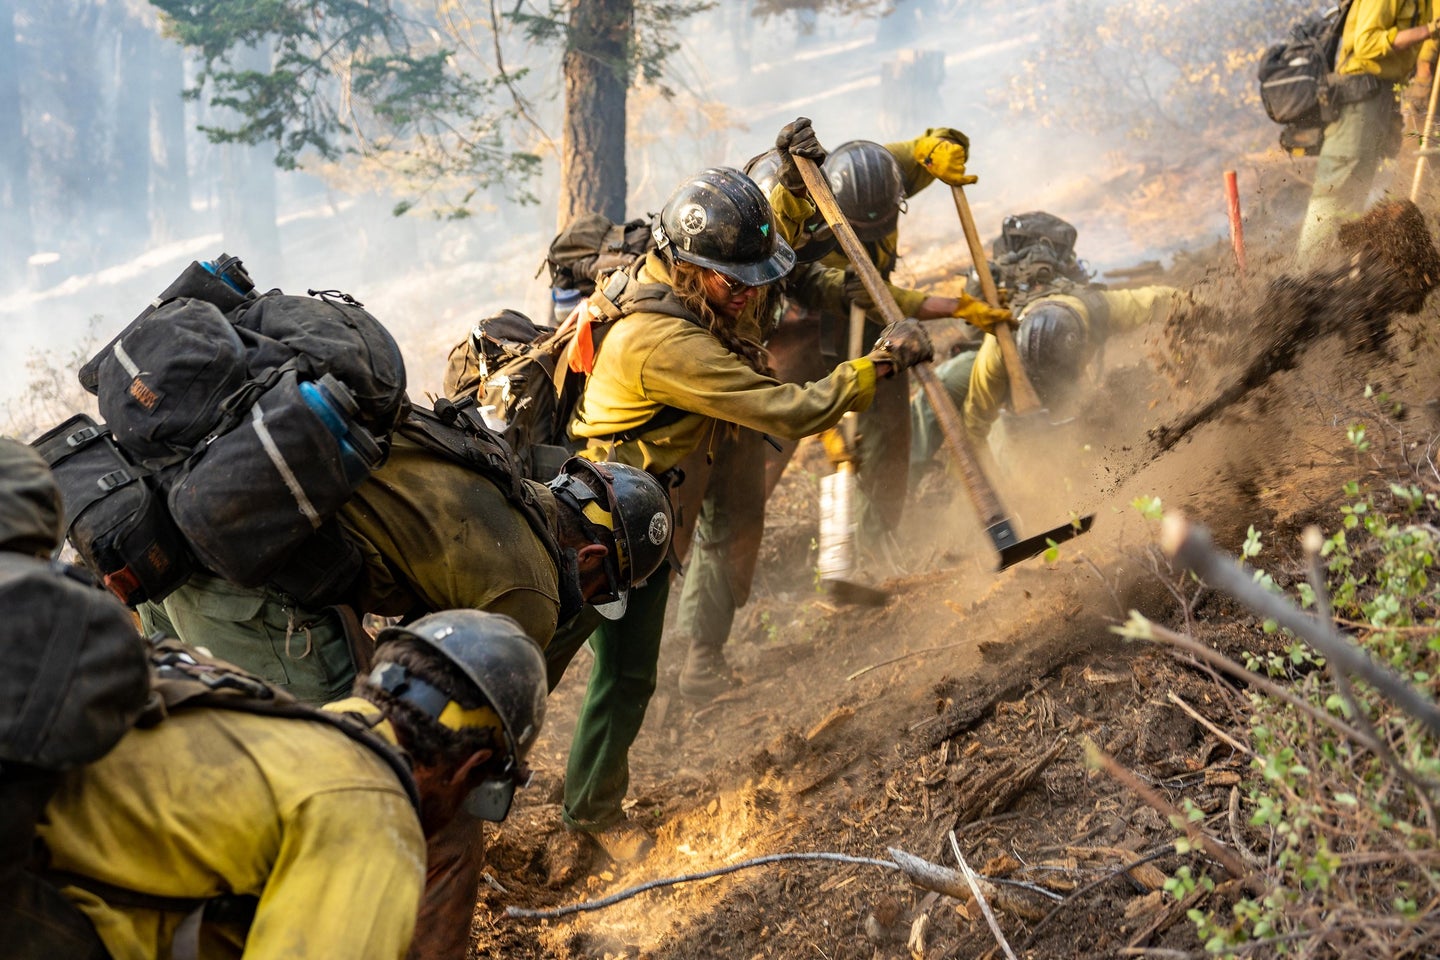 A line of firefighters dig with hand tools to construct fireline in a forest.